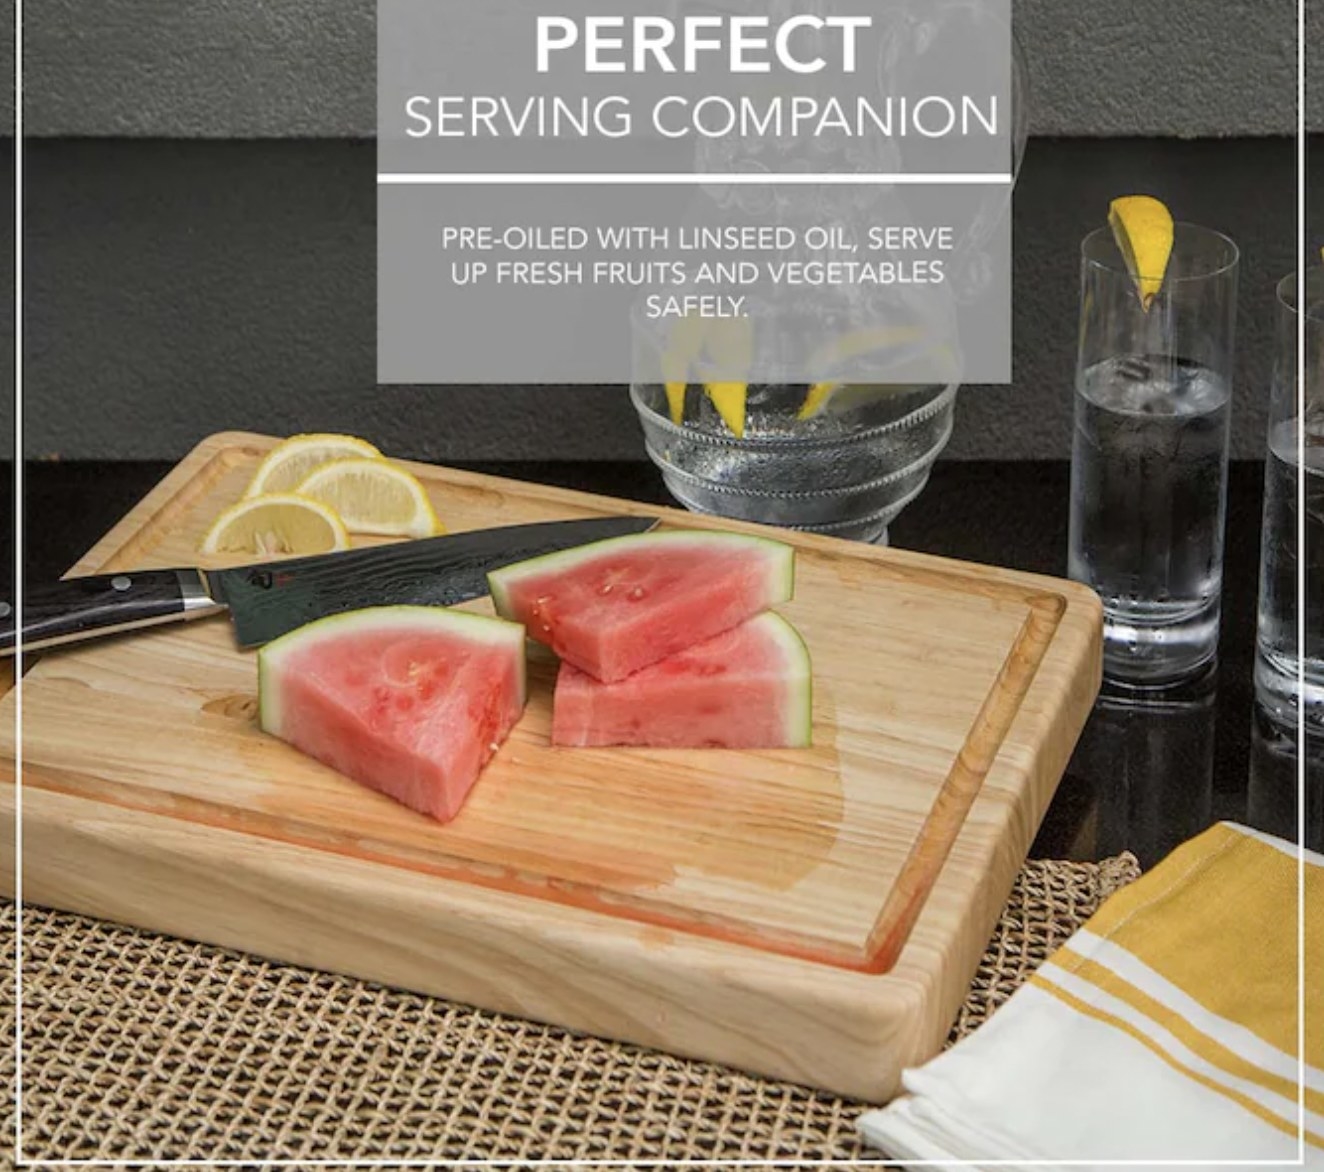 The board with watermelon and a knife, described as the &quot;perfect serving companion: pre-oiled with linseed oil, serve up fresh fruits and vegetables safely&quot;